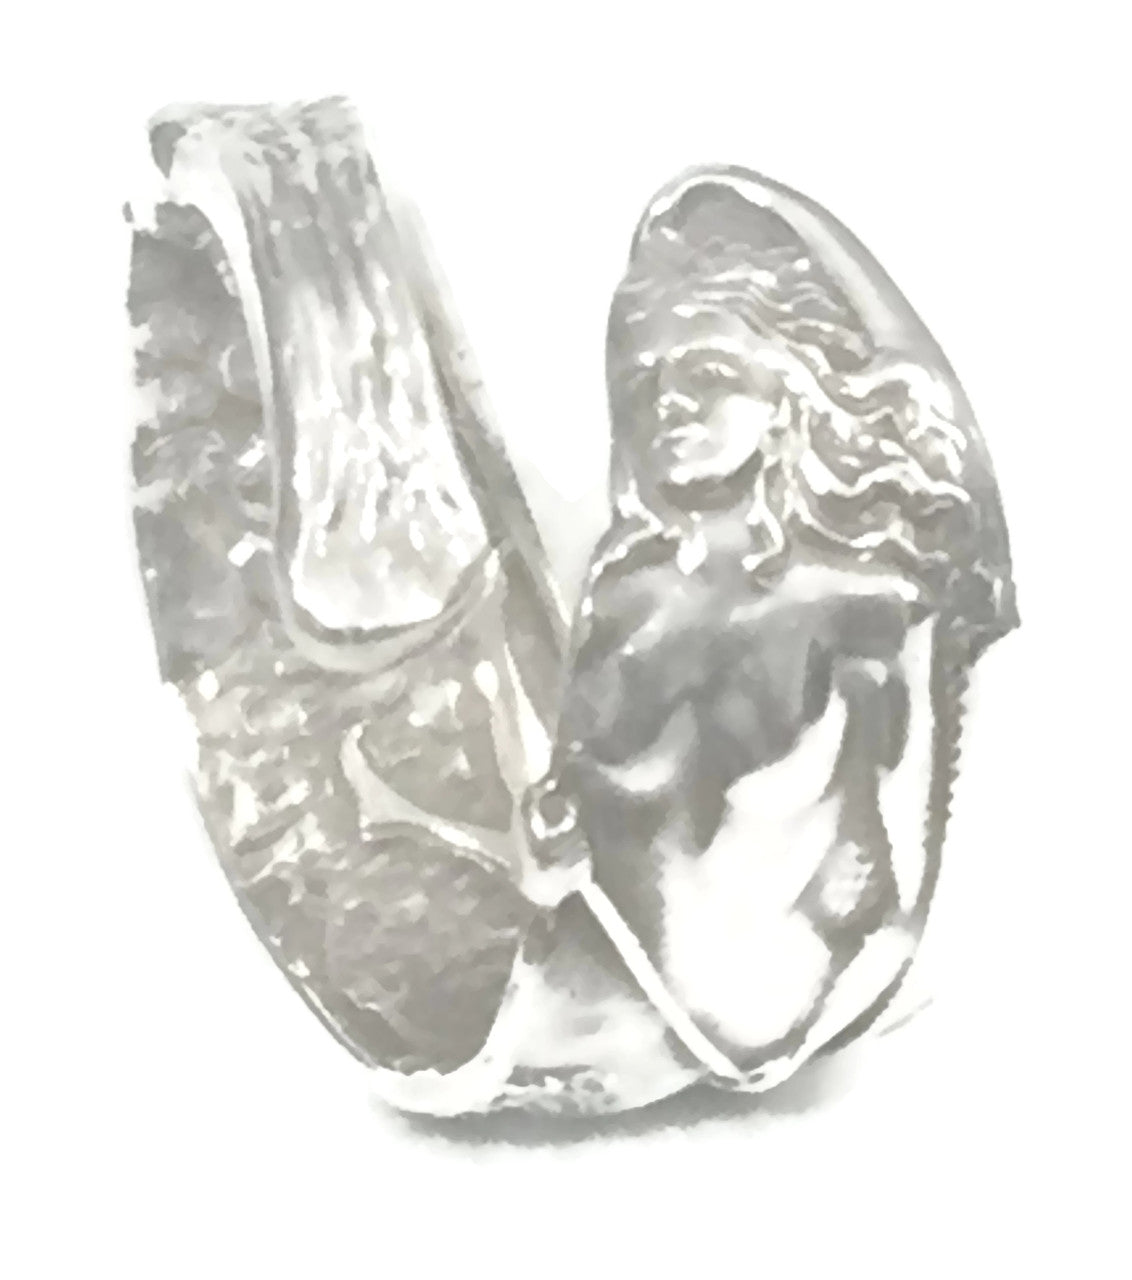 Spoon Naked Lady Ring Vintage Paddle Canoe Sterling Silver Size 7